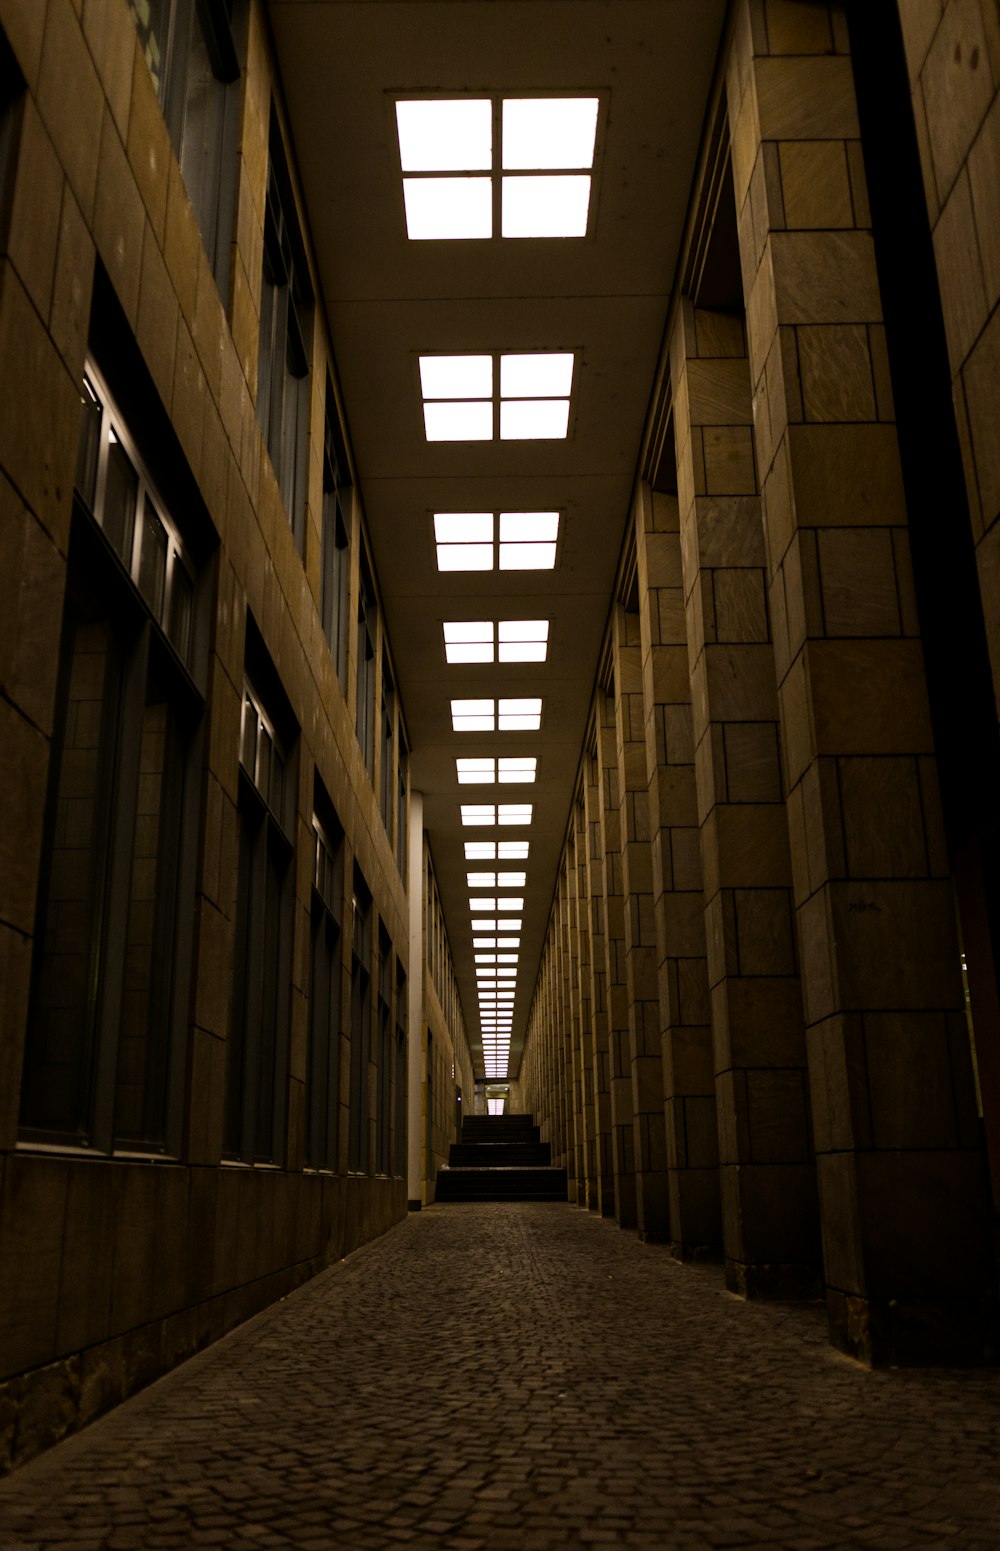 a long hallway with several windows and a brick floor